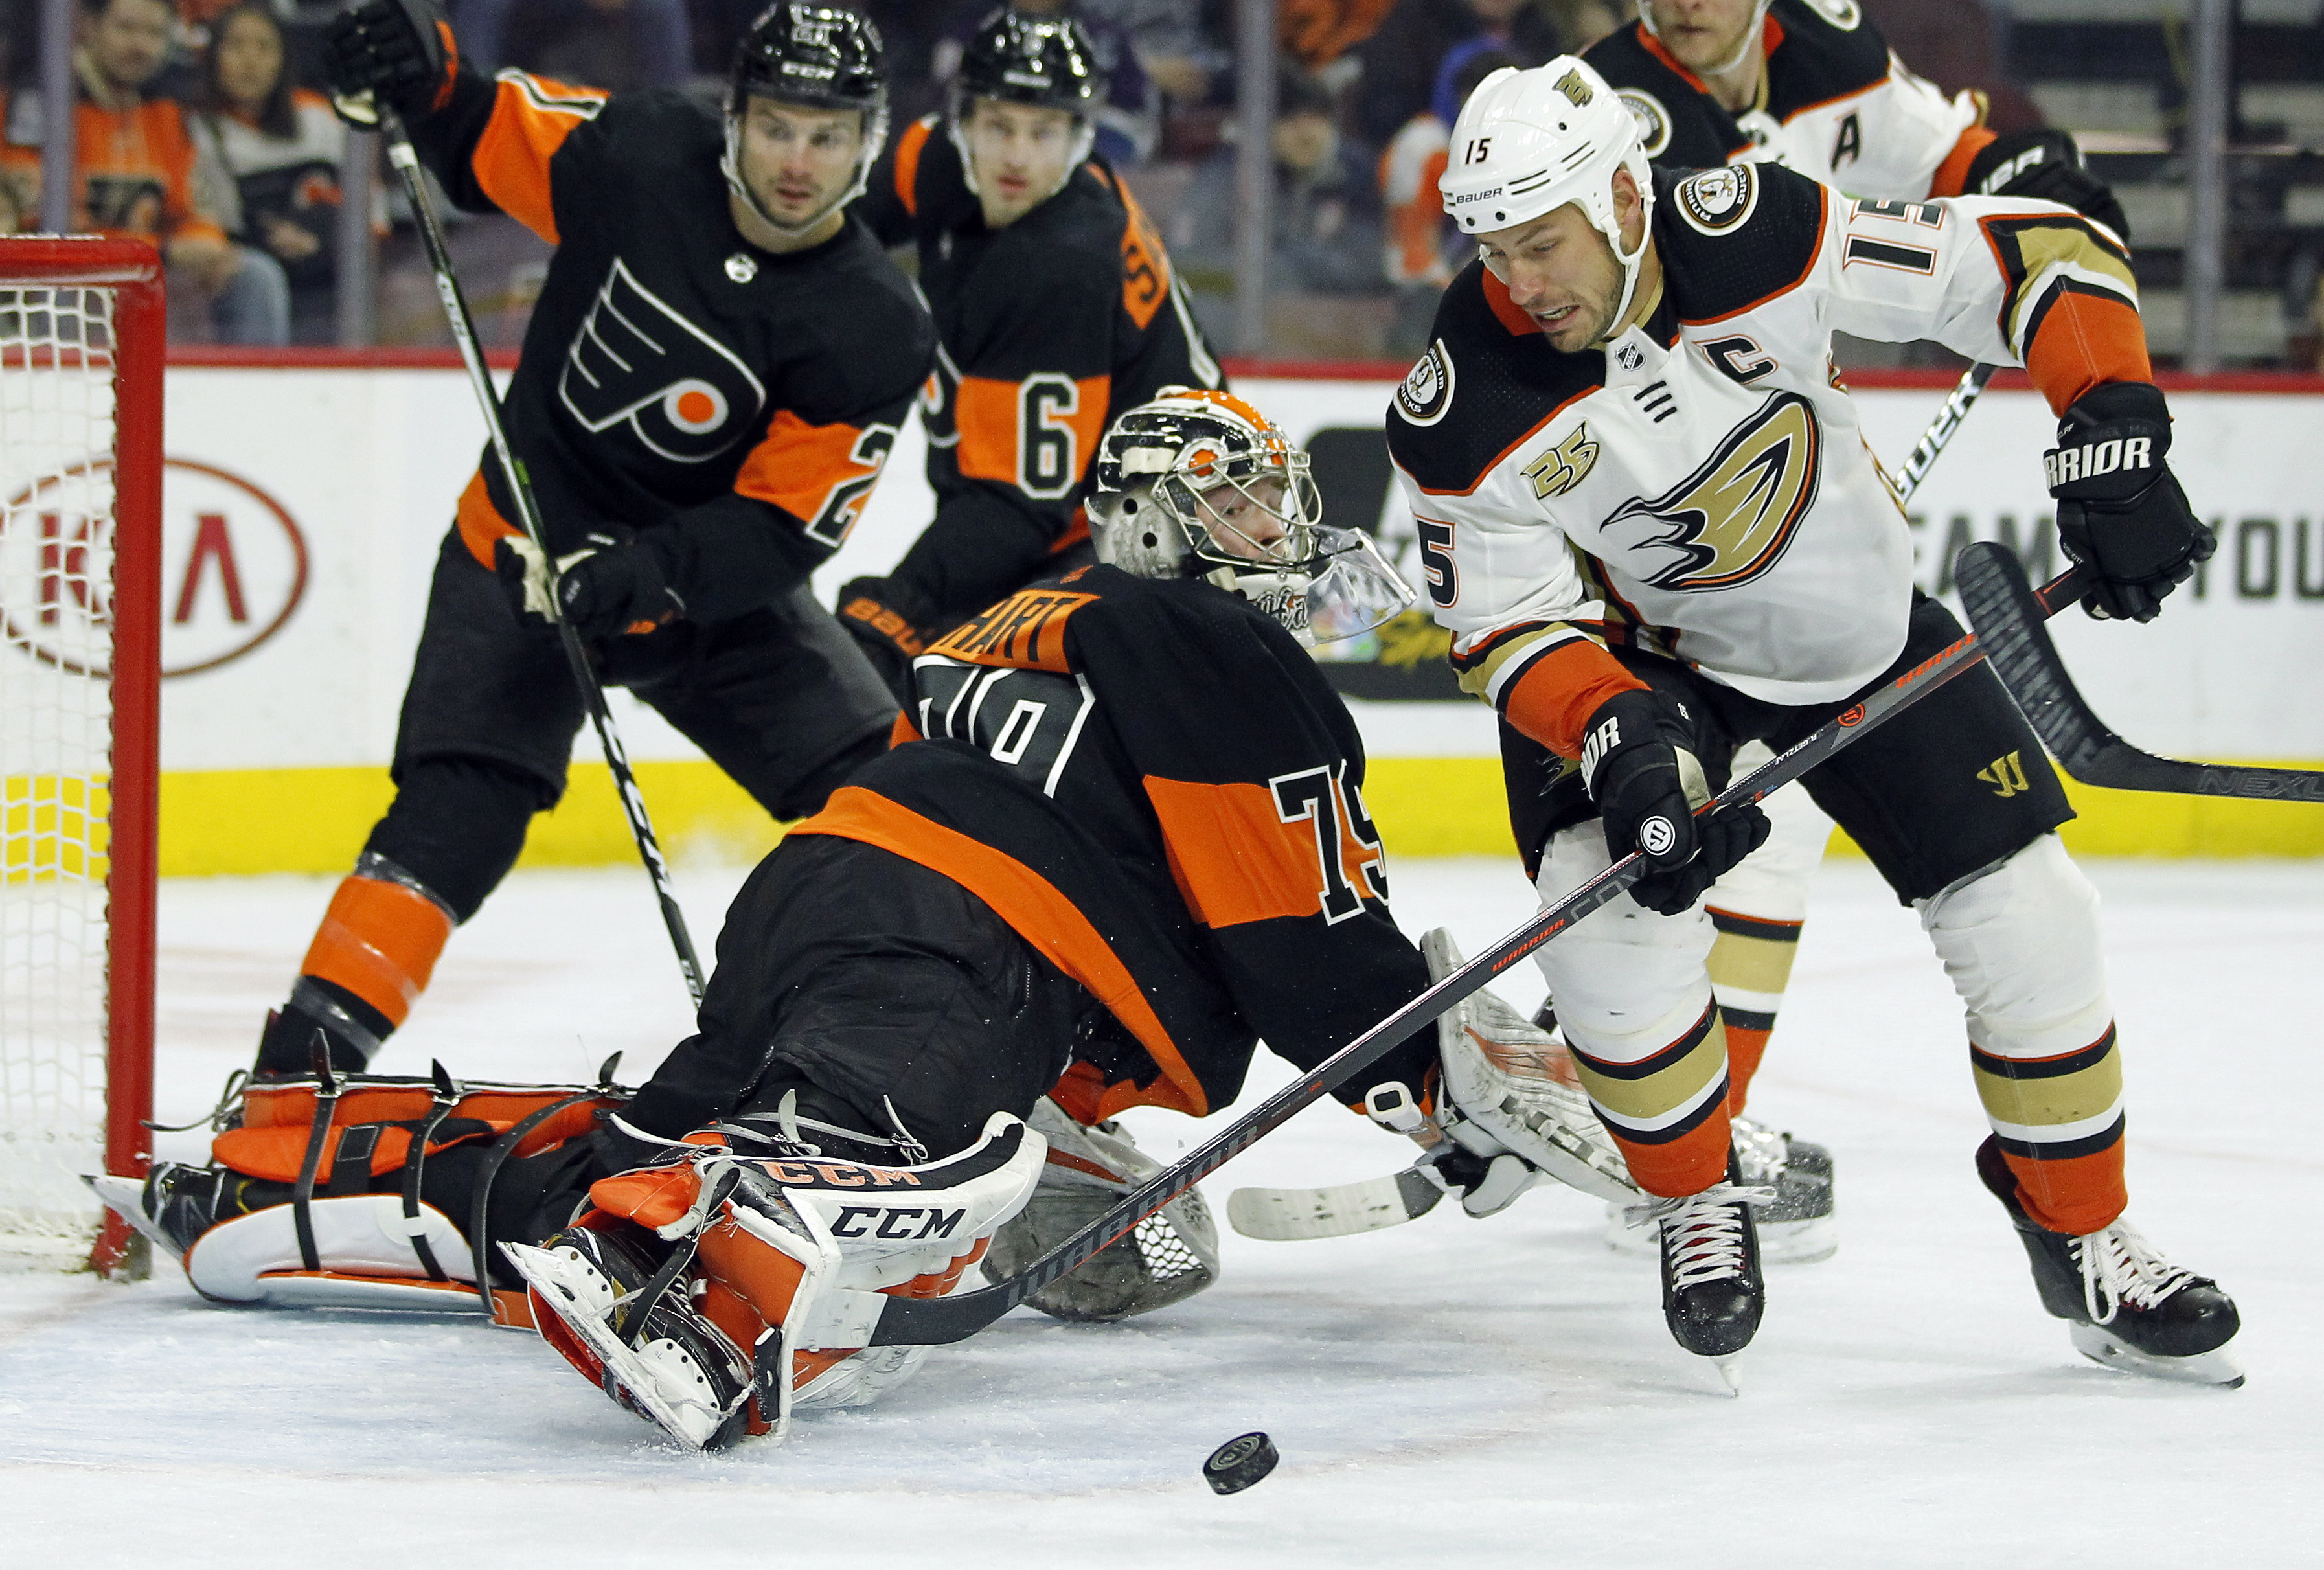 Flyers beats Ducks 6-2 for 9th victory in 10 games